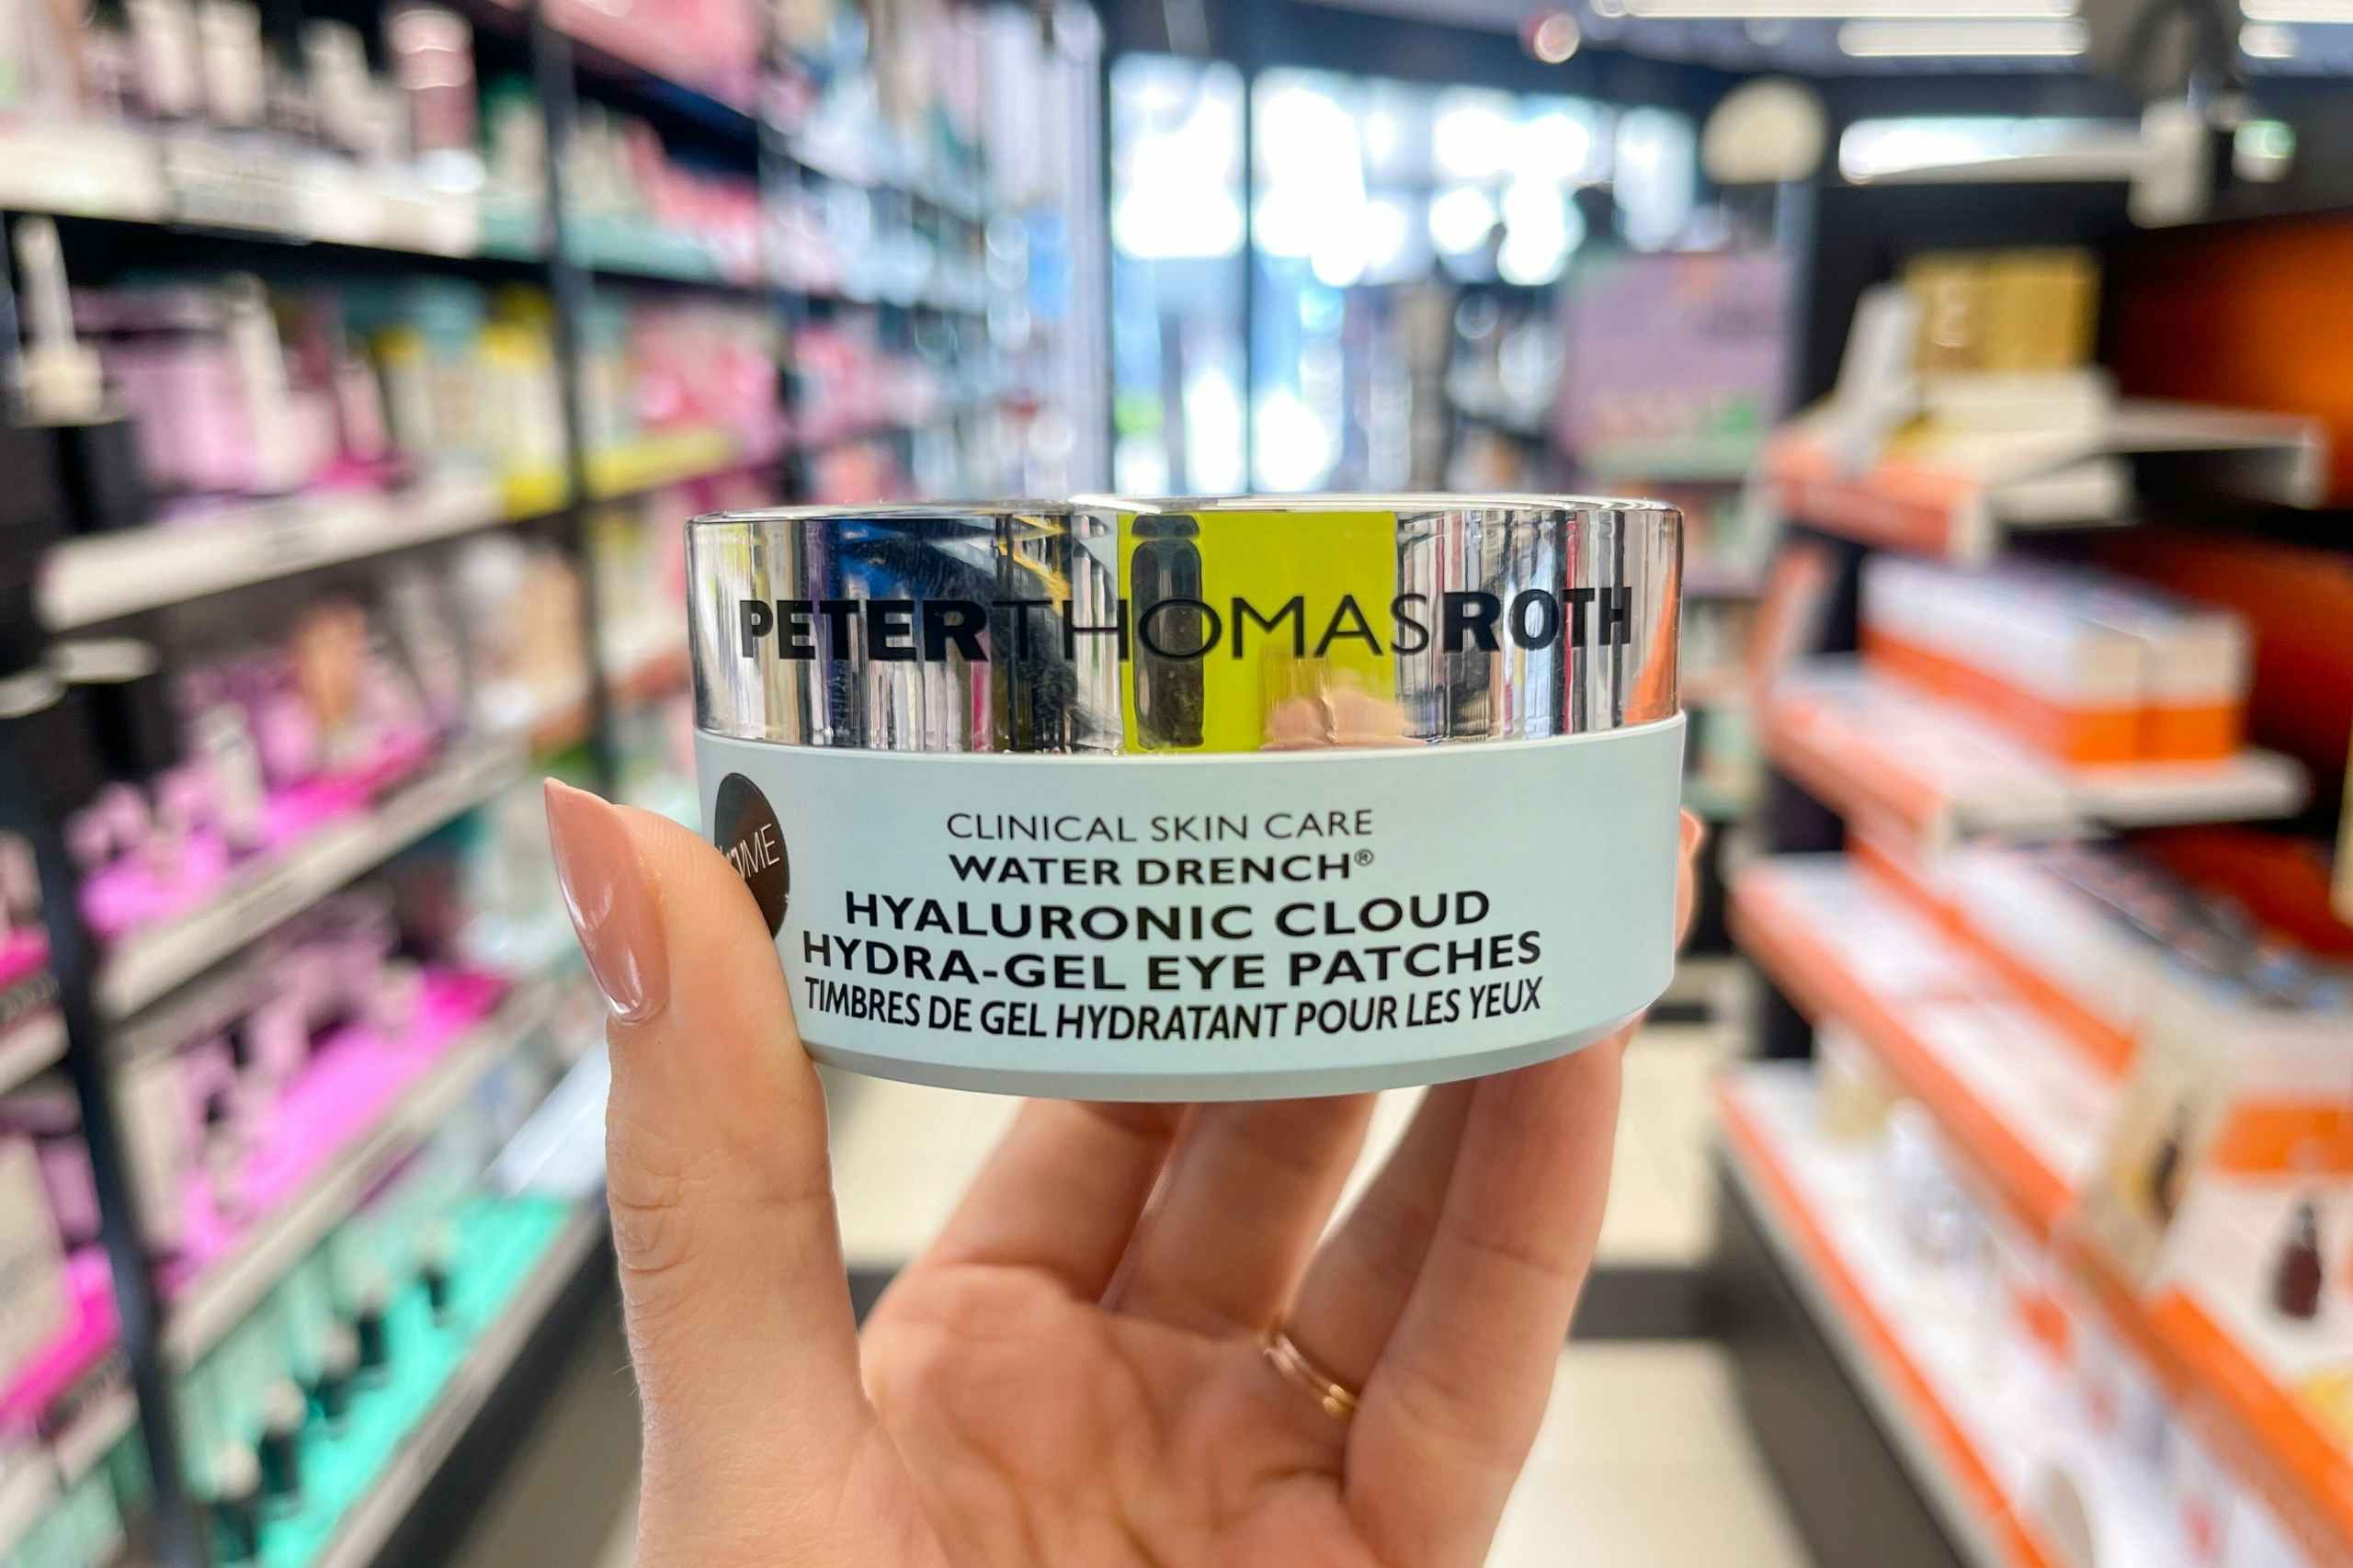 Peter Thomas Roth 24K Gold Eye Patches, as Low as $45.55 on Amazon